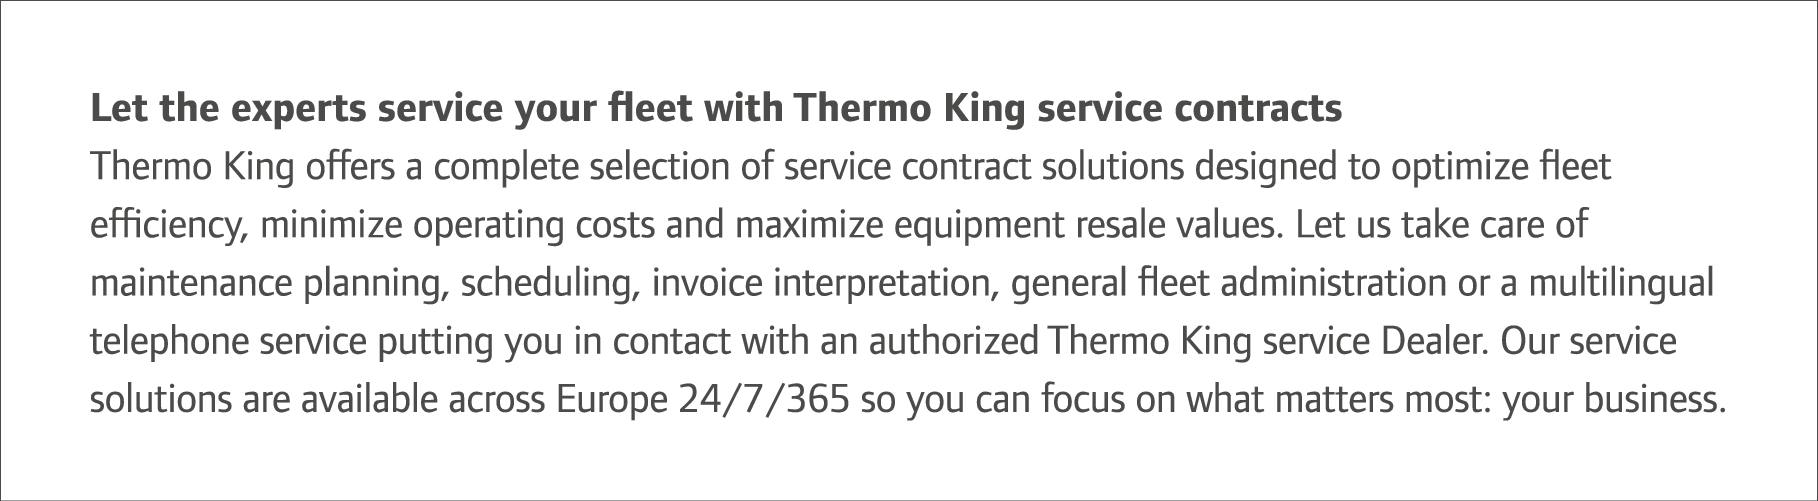 Let the experts service your fleet with Thermo King service contracts Thermo King offers a complete selection of serv...